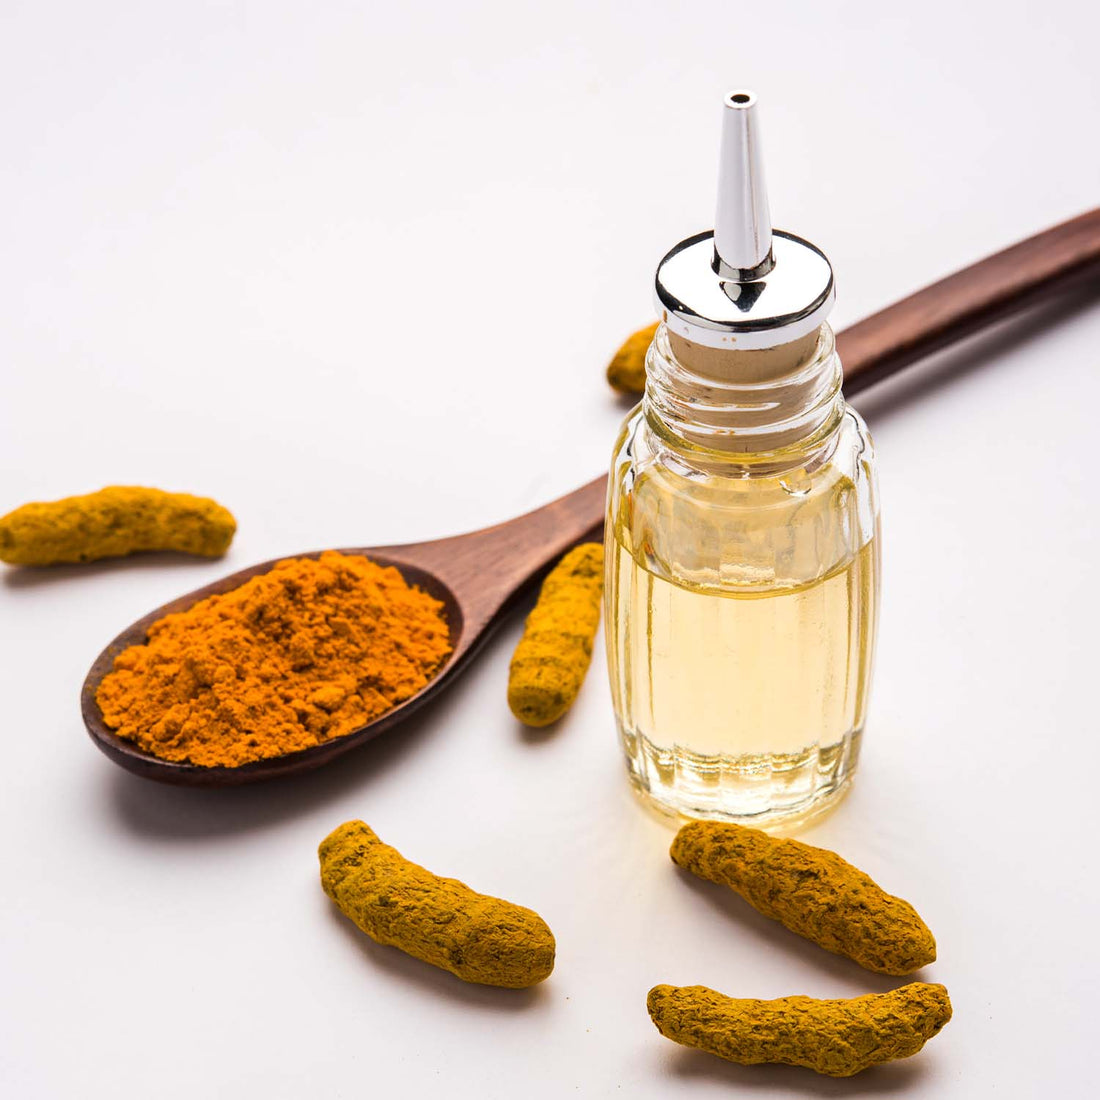 Turmeric (Curcuma Longa) Root Oil: A vibrant yellow oil derived from the turmeric root, known for its anti-inflammatory and antioxidant properties.